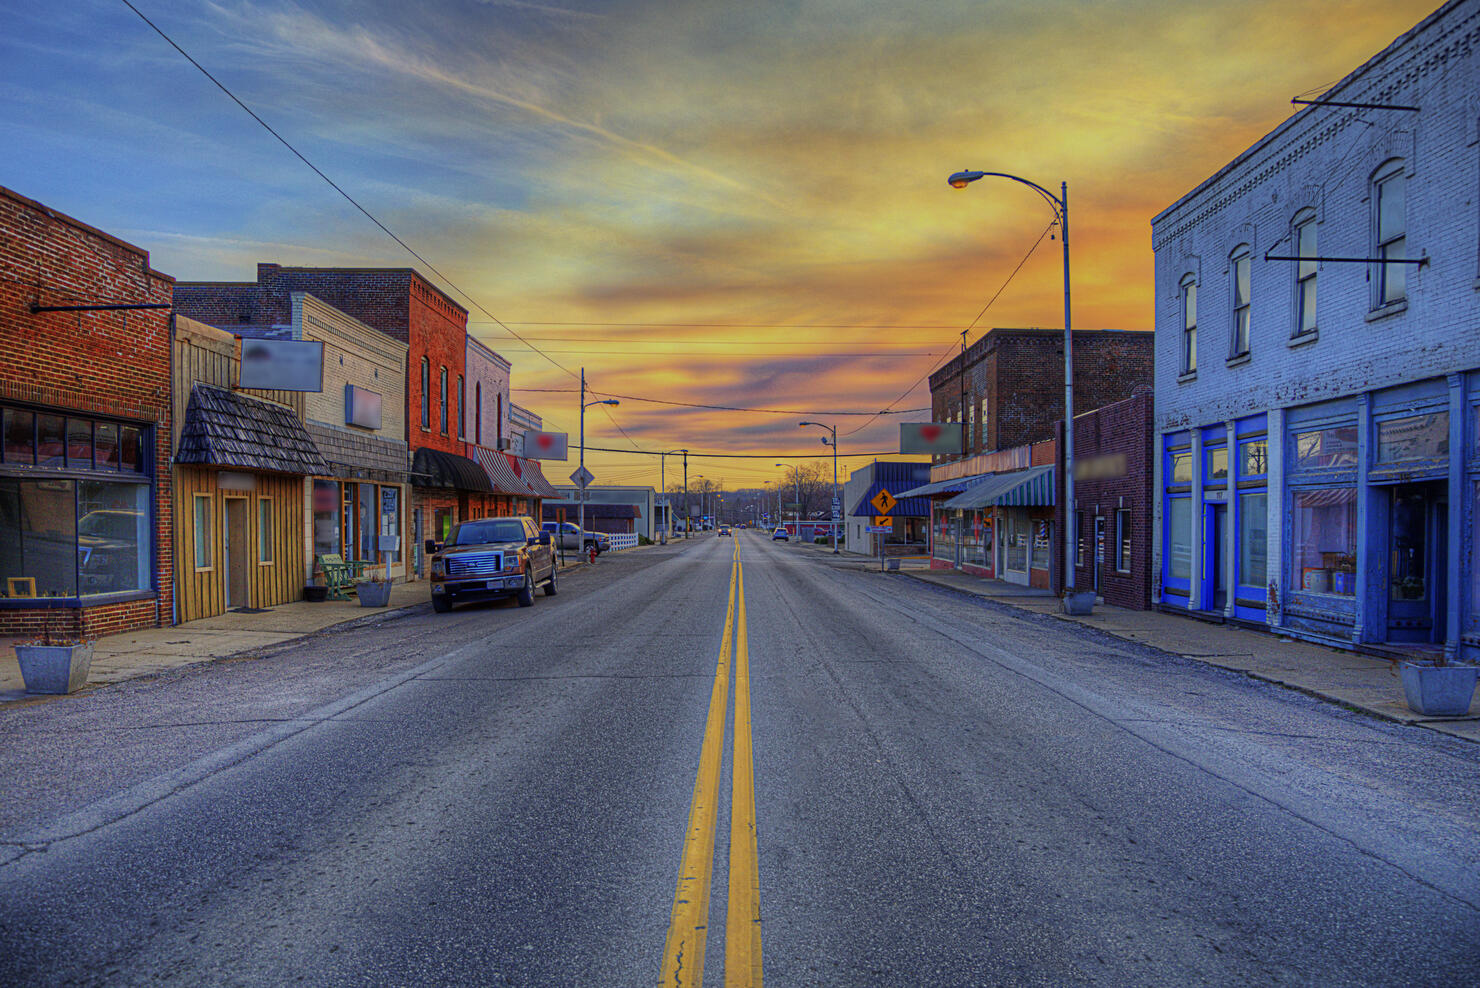 Looking Down Main Street at Sunset II